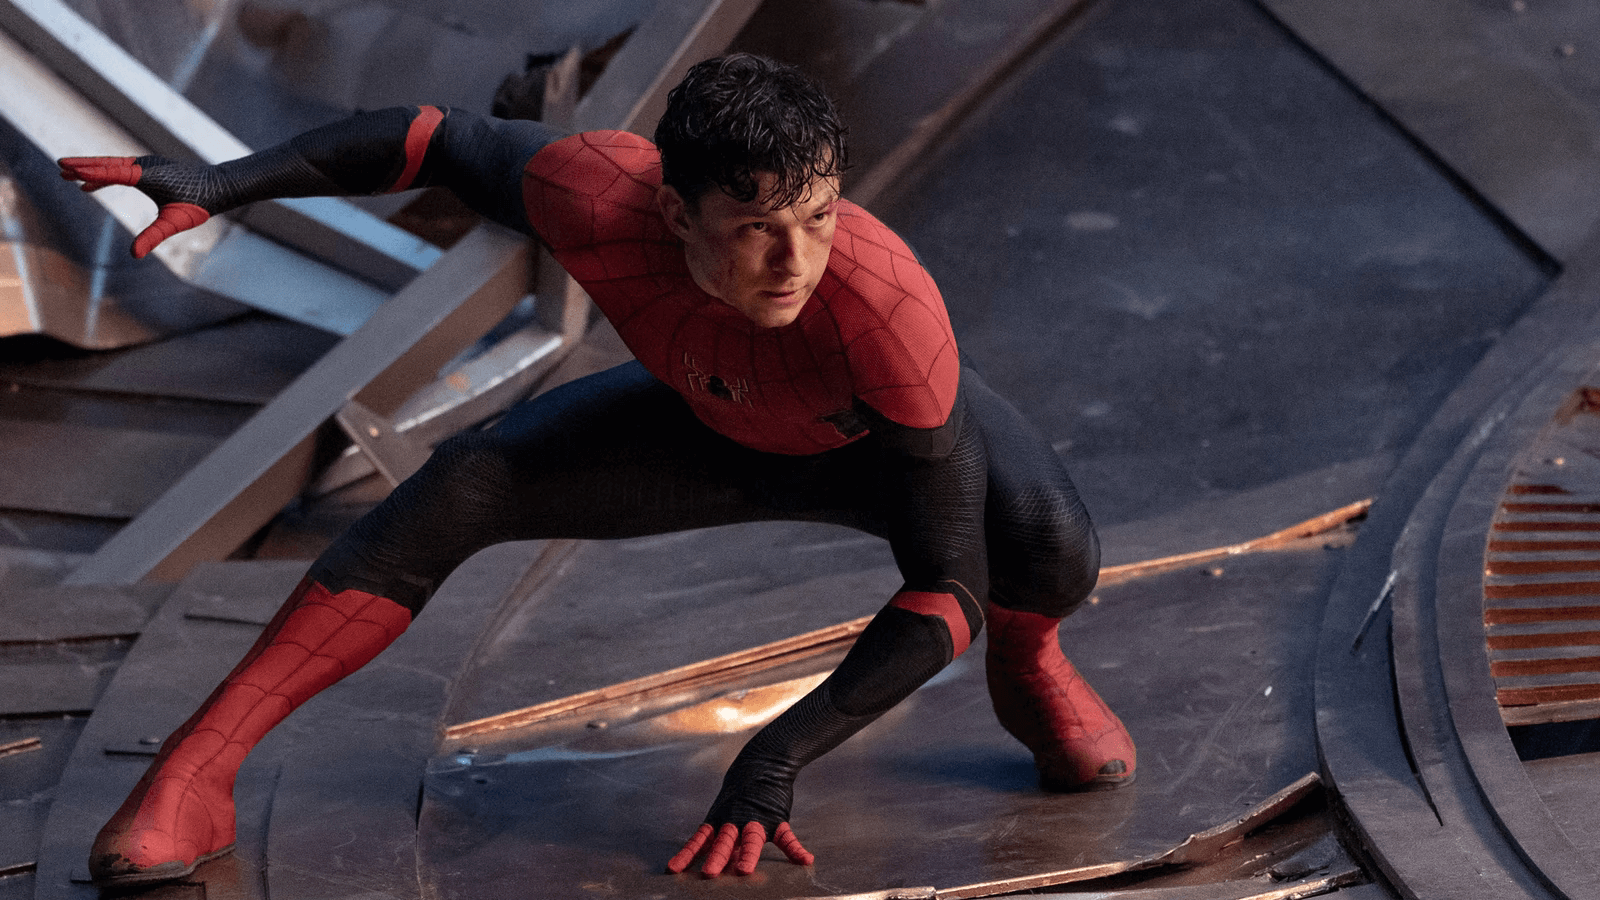 Tom Holland in Spider-Man: No Way Home set in Kevin Feige's MCU